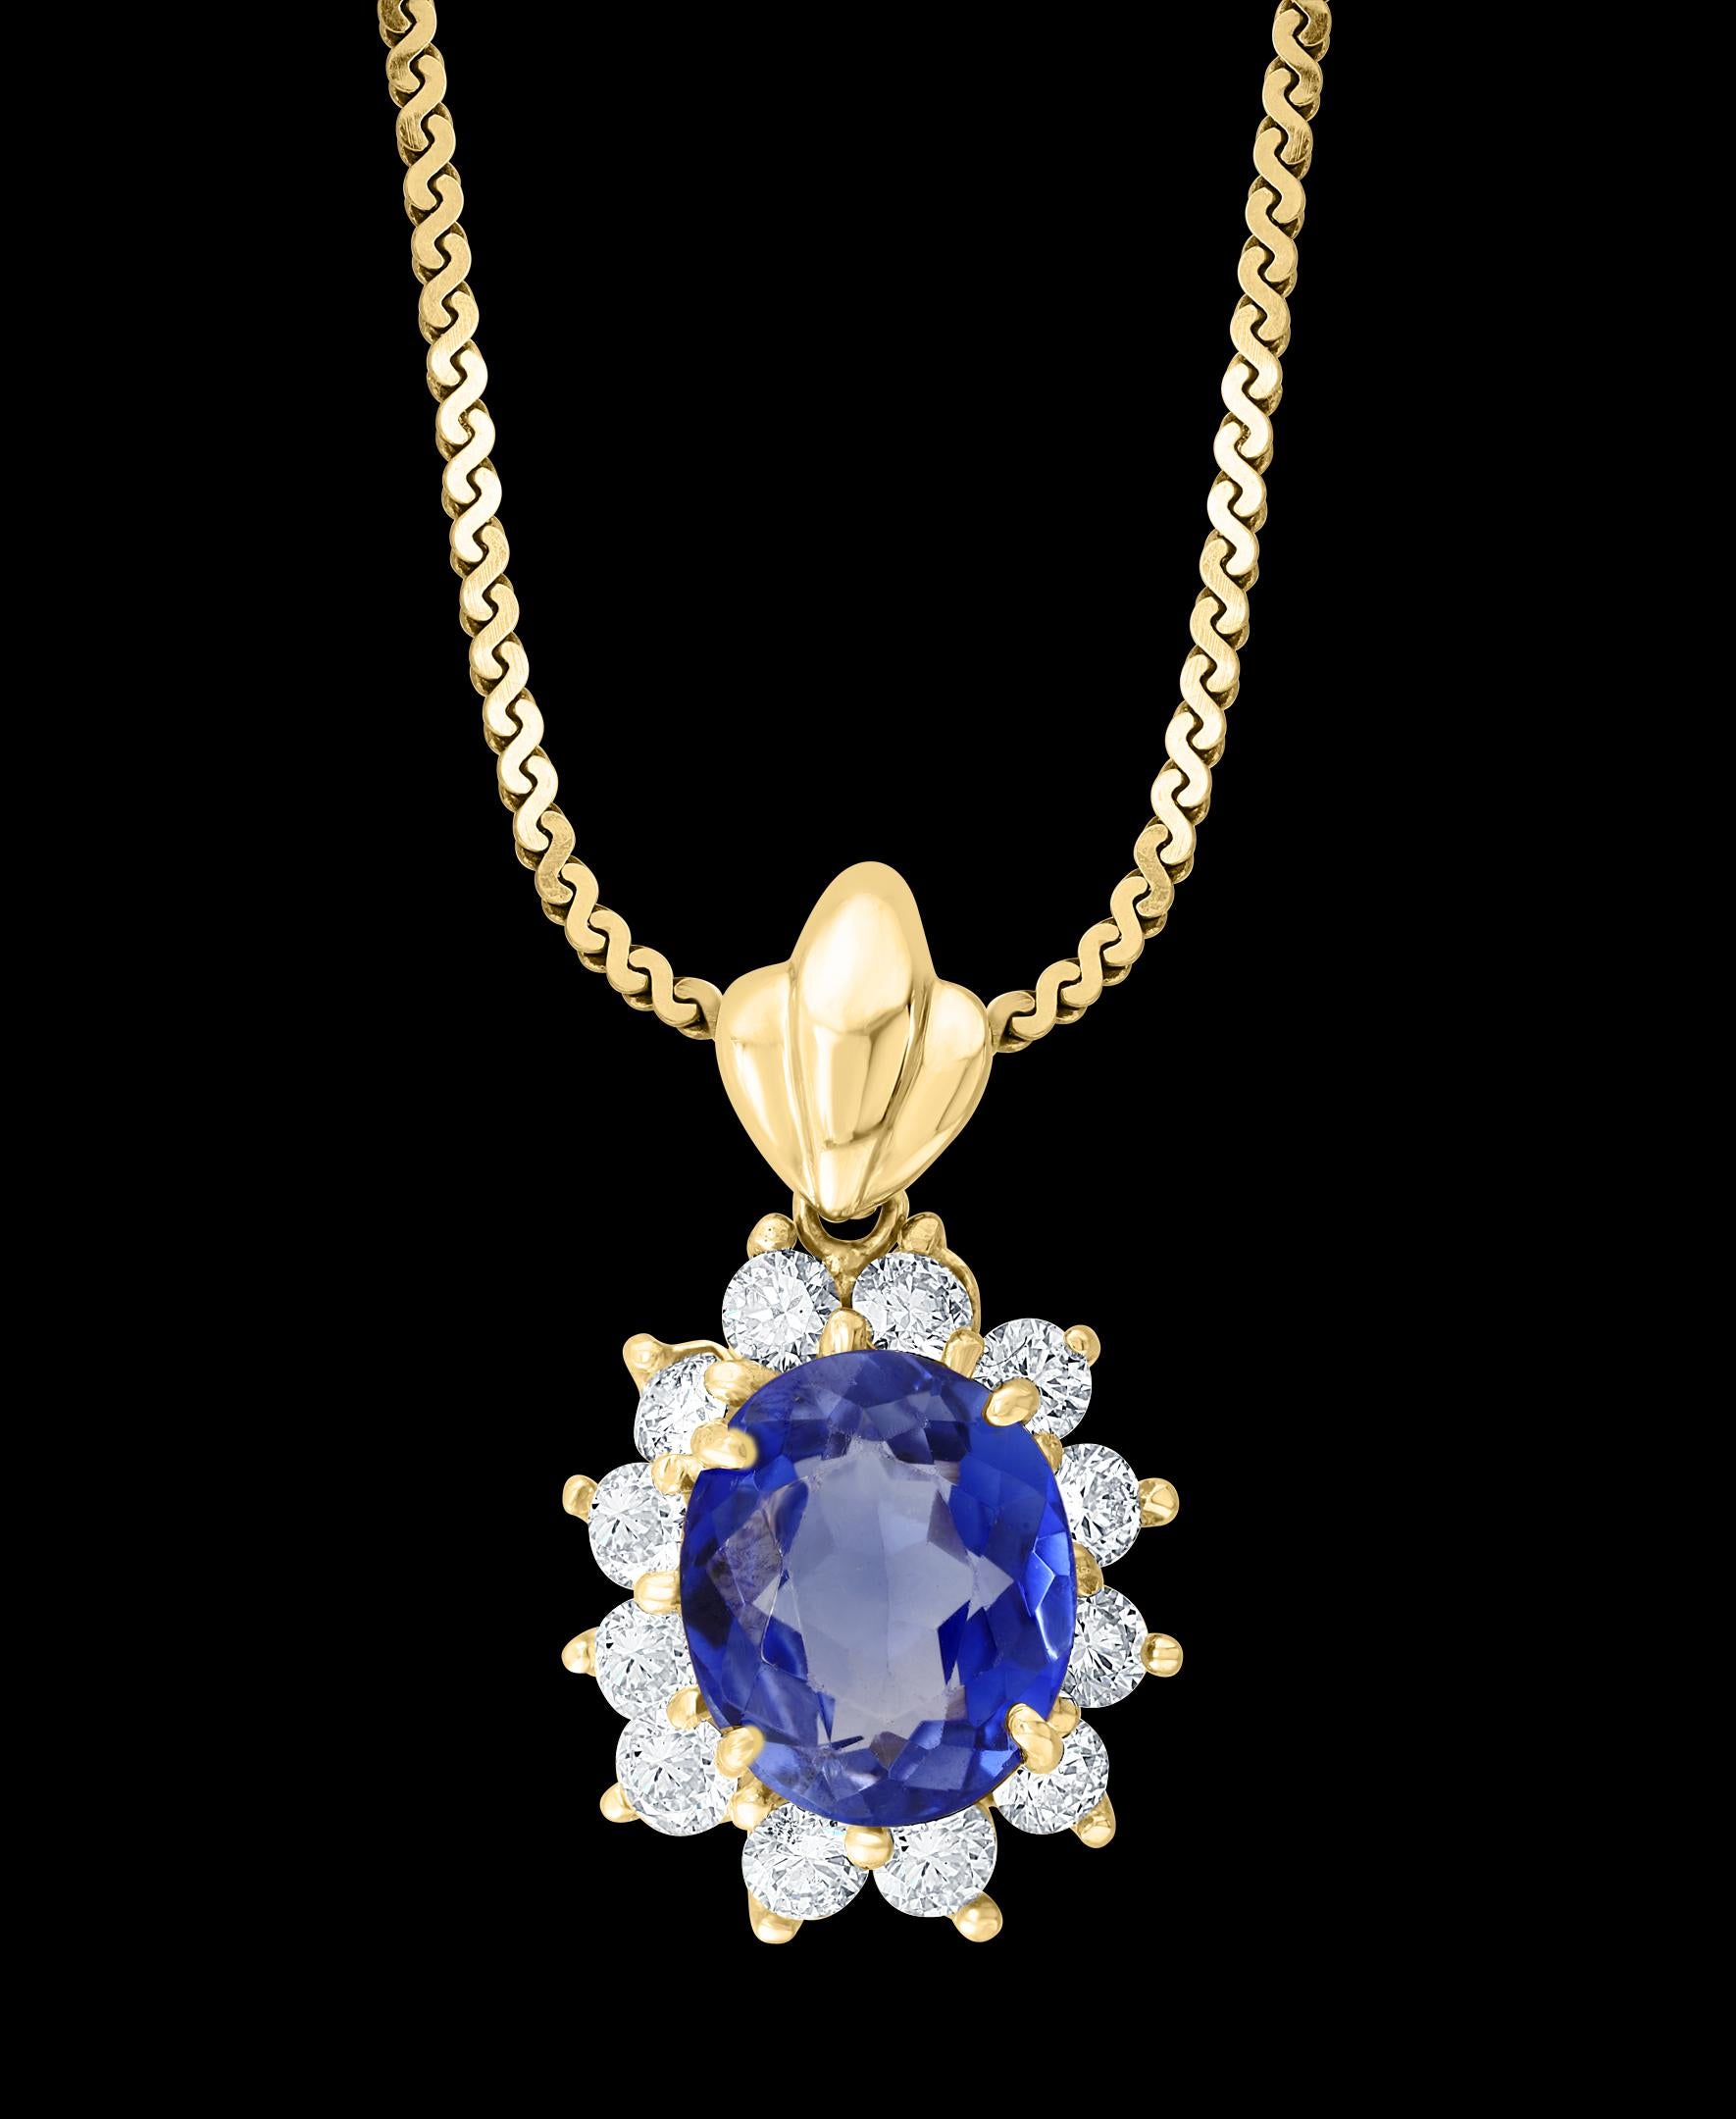 3 Carat Tanzanite and 1 Ct Diamond  Pendant or Necklace 14 Karat  Yellow Gold
Tanzanite Weight  approximately 3  Carats, very good  quality of Tanzanite , very fine desirable blue color .
12 Brilliant cut diamonds of high quality are surrounding the